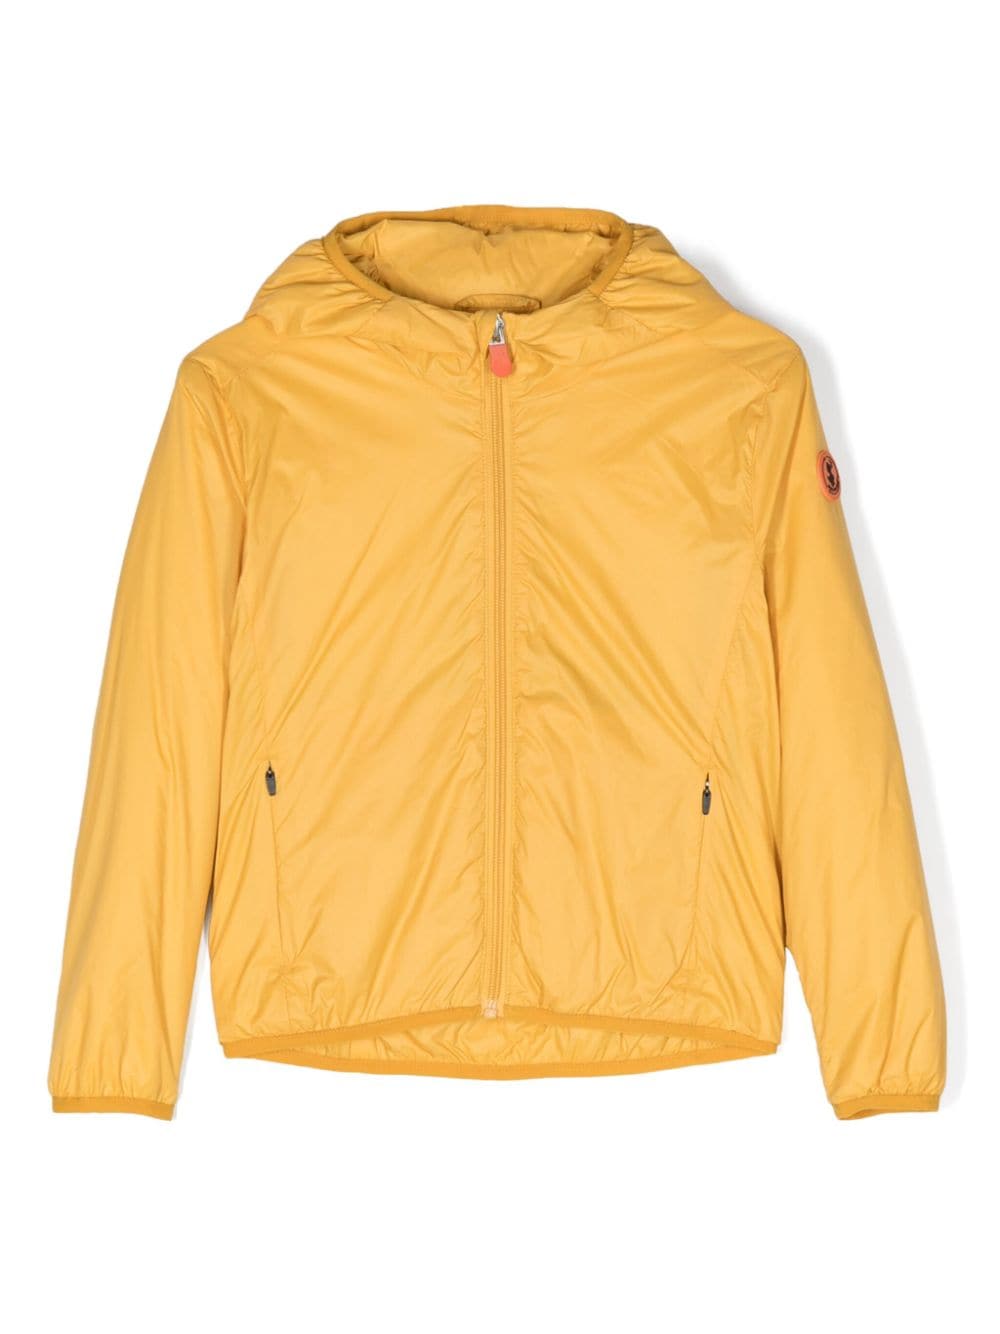 Save The Duck Kids Shilo hooded jacket - Yellow von Save The Duck Kids